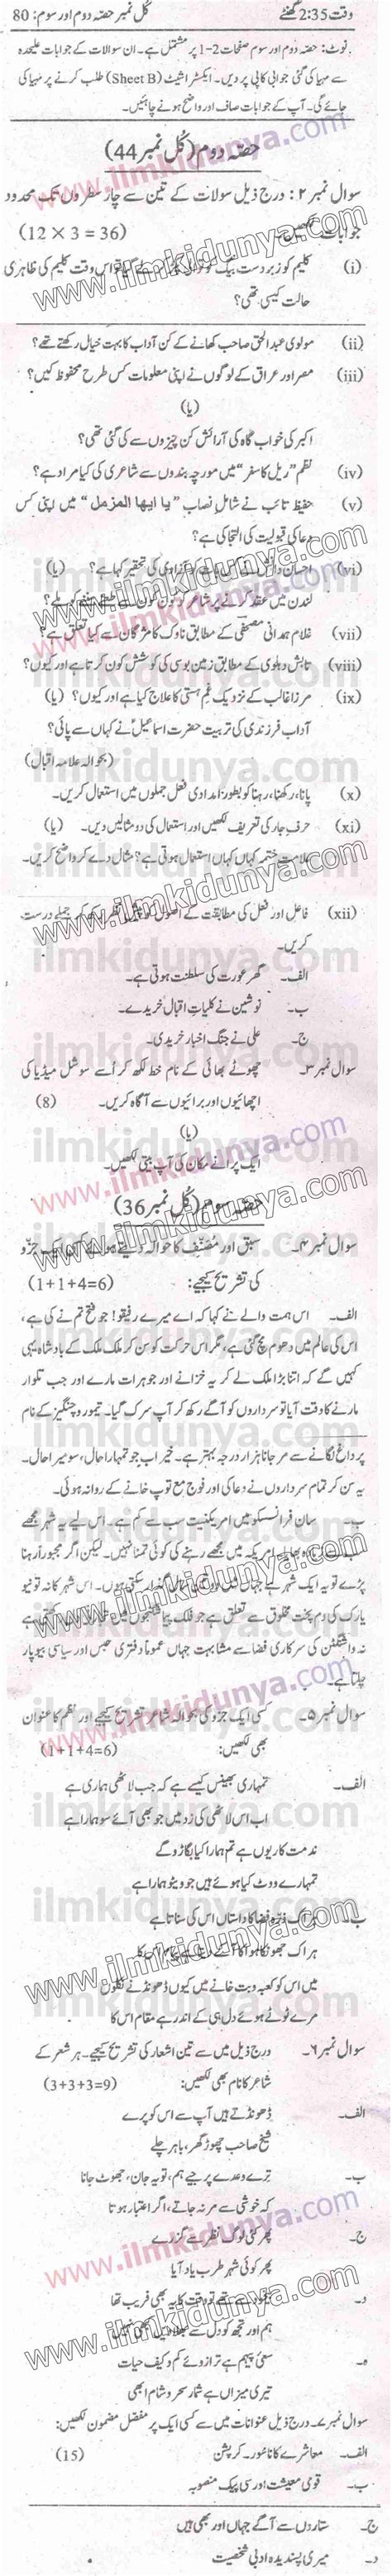 papers  federal board inter part  urdu subjective